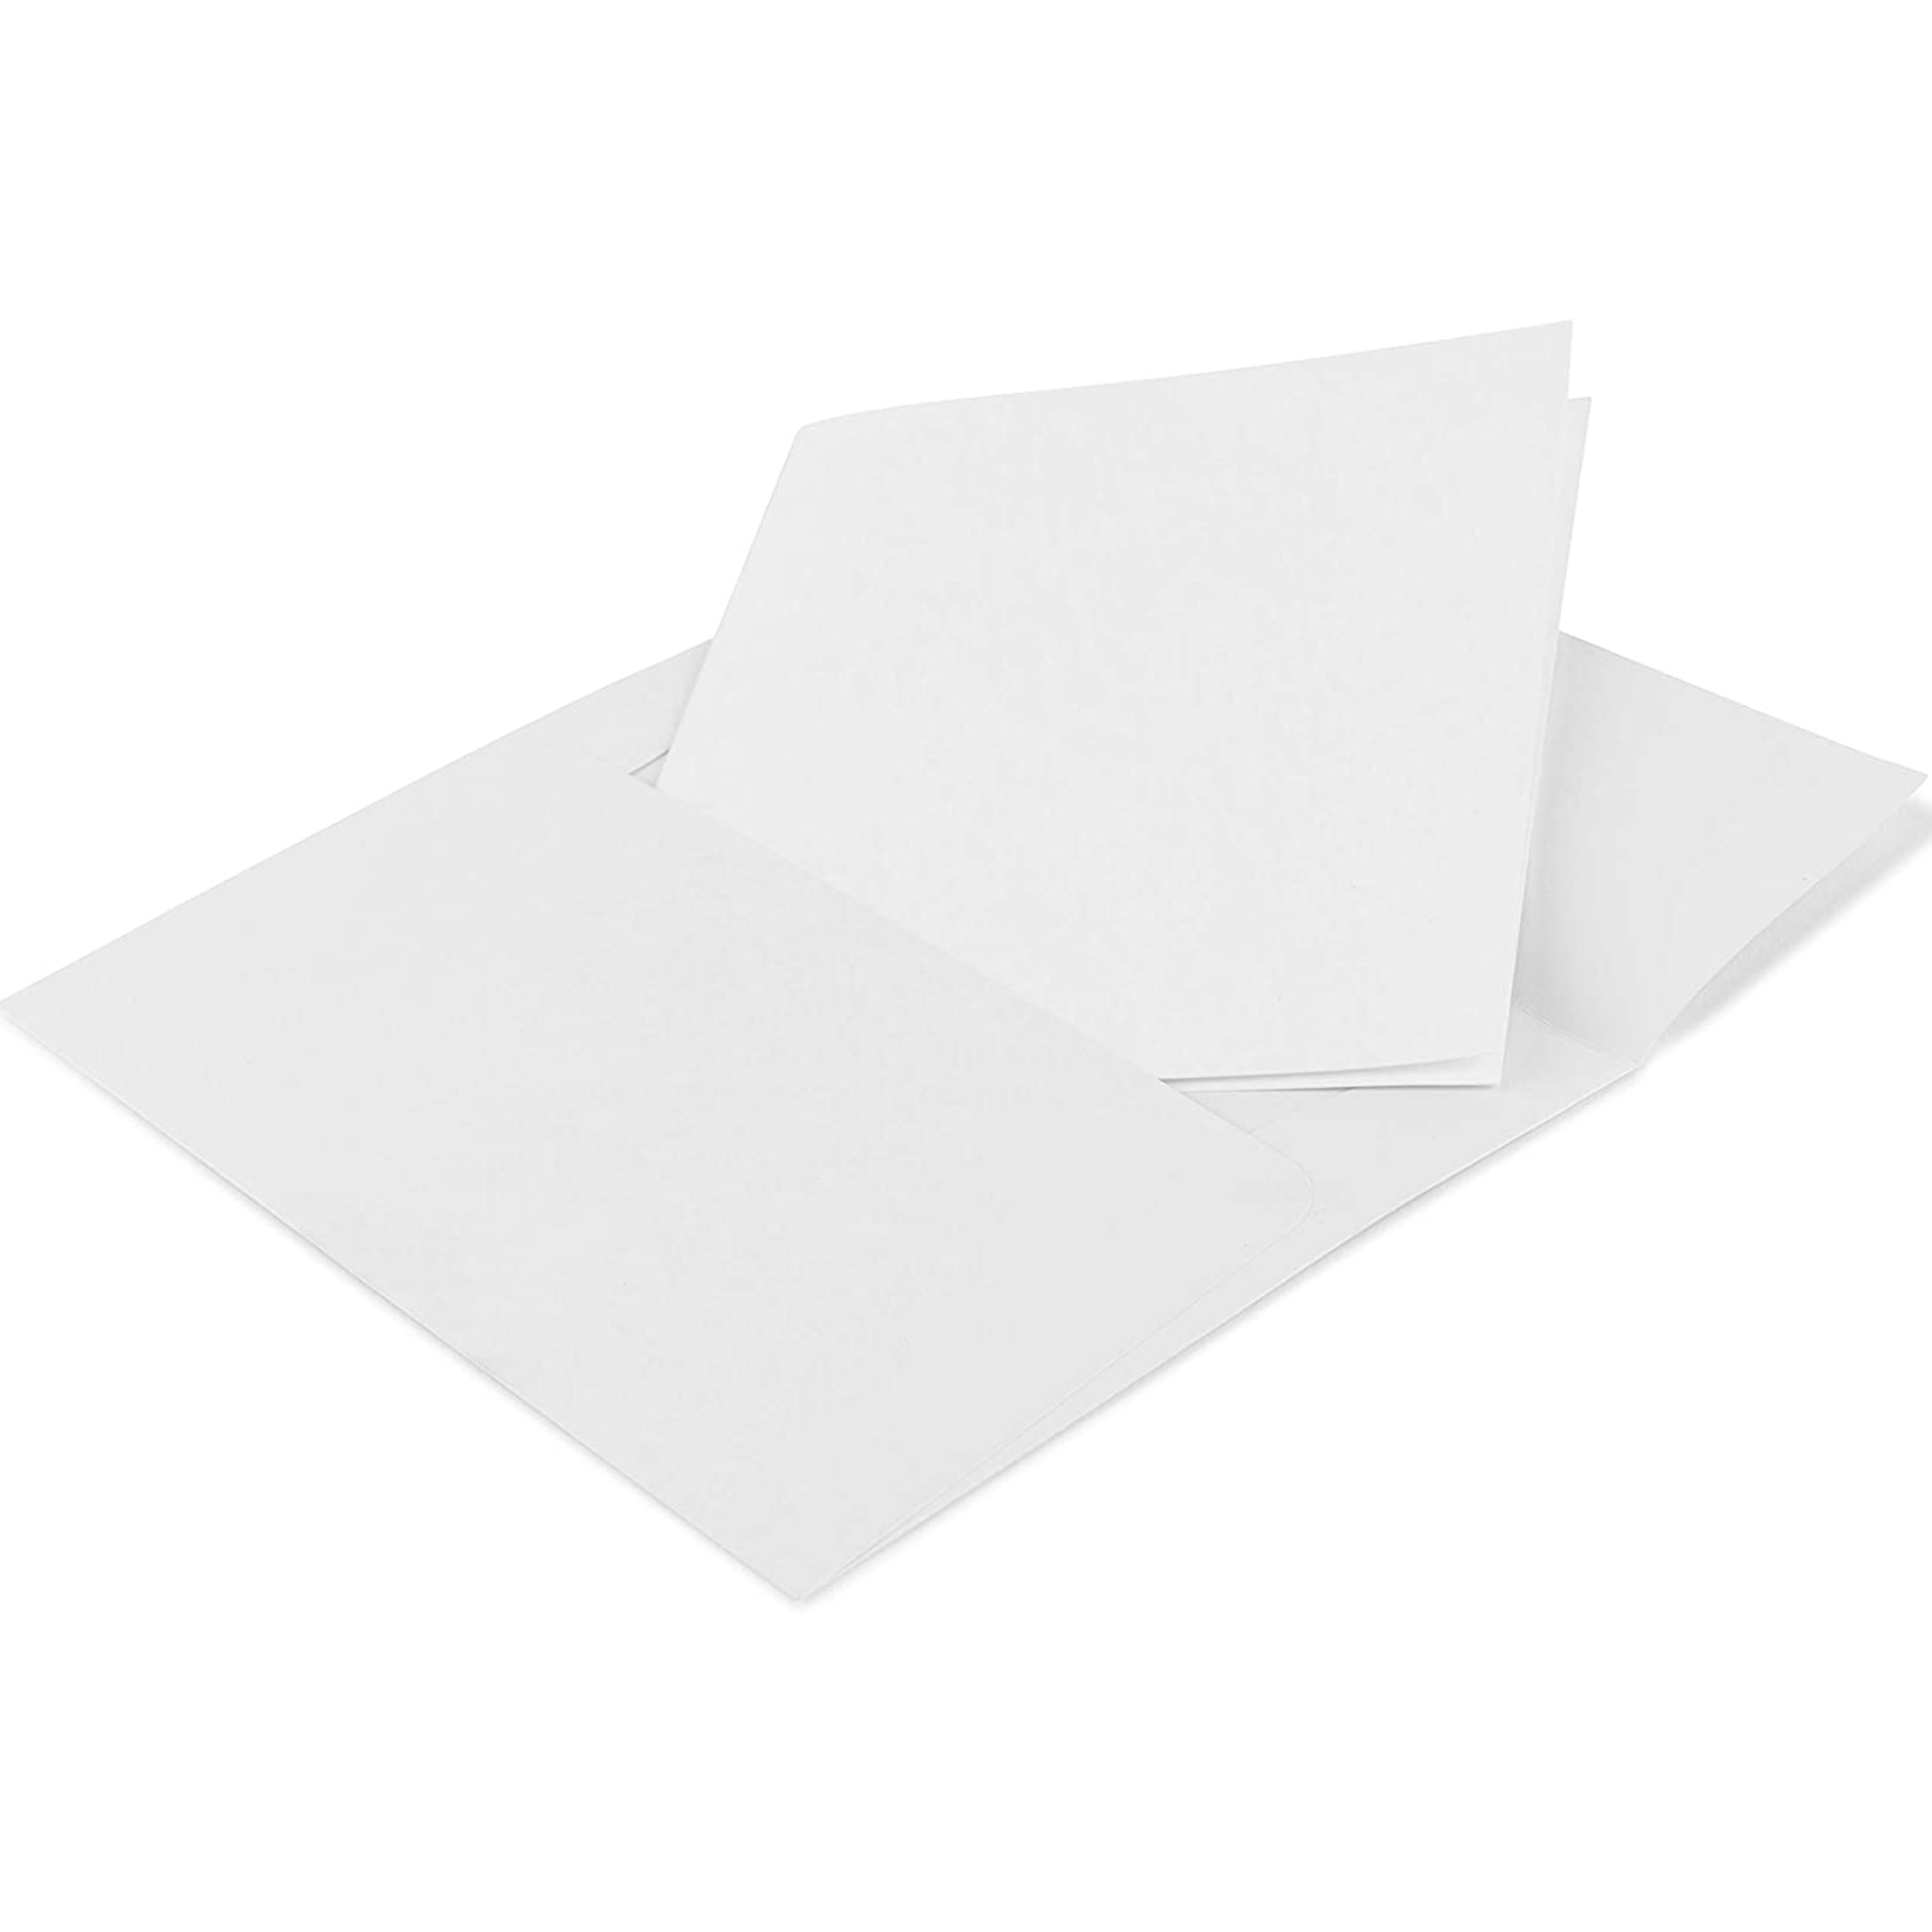 Purple Q Crafts Blank Cards with Envelopes for Card Making, White